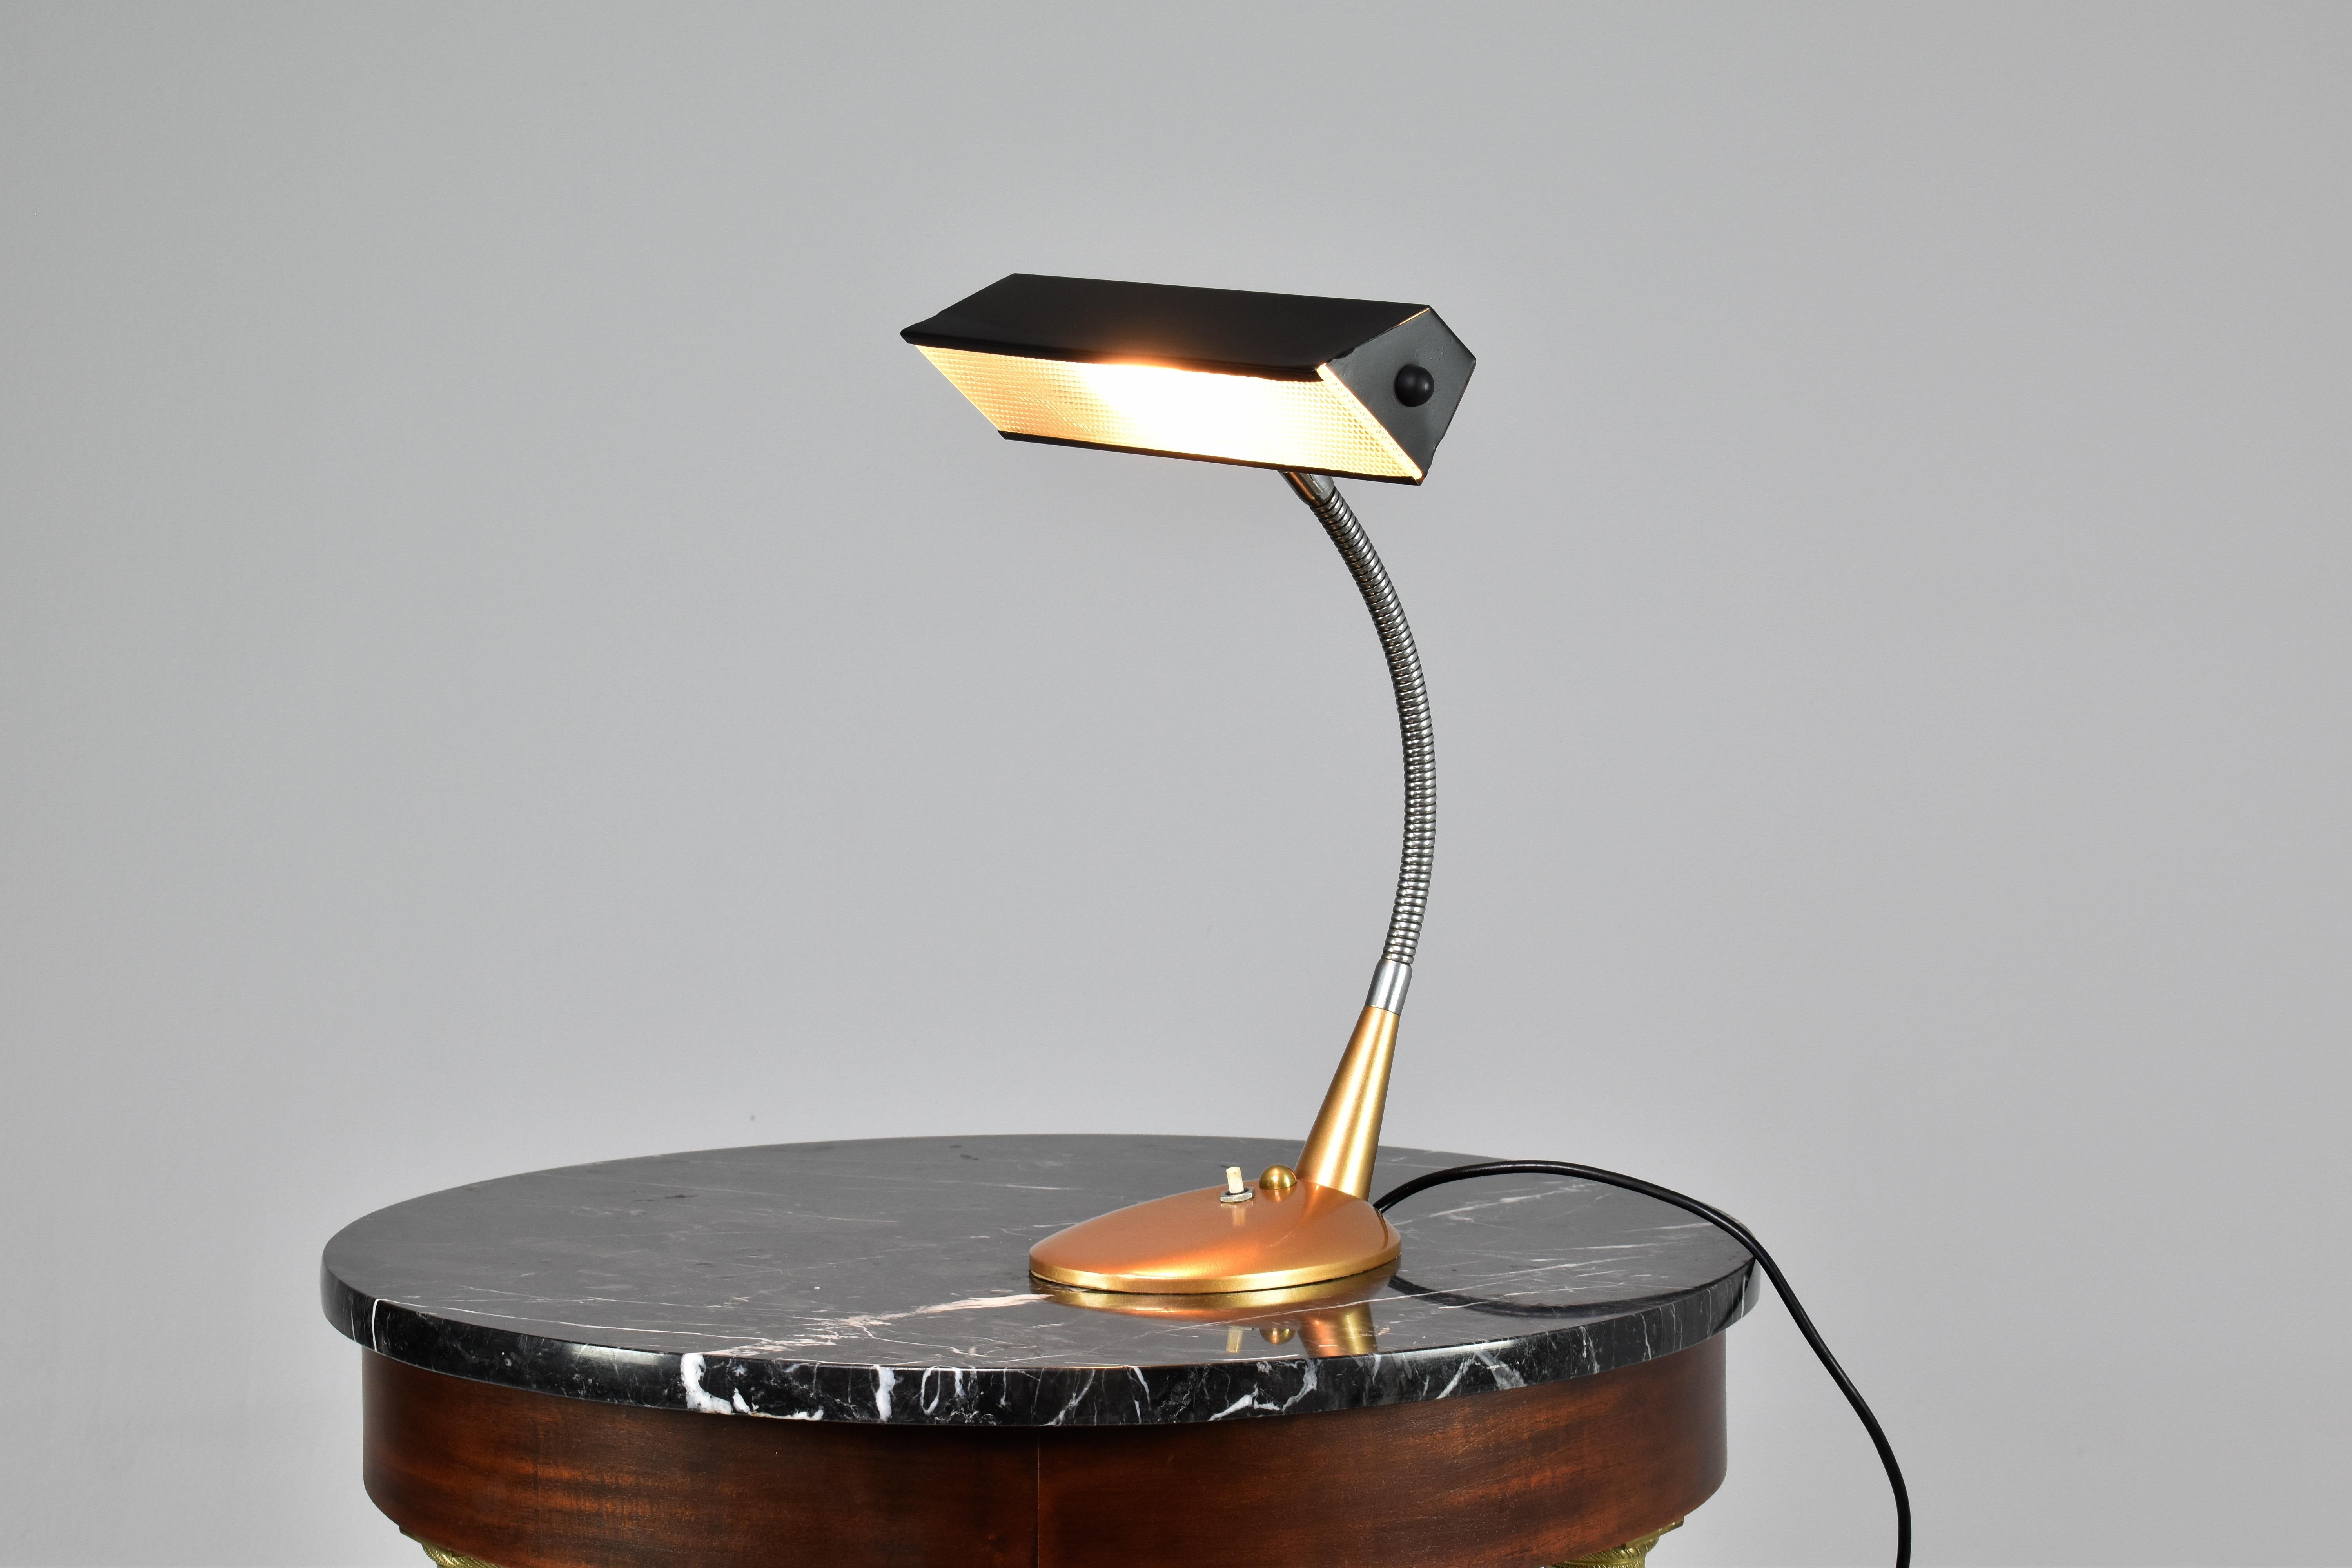 An Italian 1950s vintage desk lamp with an articulating gooseneck arm and diffuser shade. The glass diffuser helps to soften and distribute the light evenly, making these lamps particularly useful for tasks that require focused lighting, such as